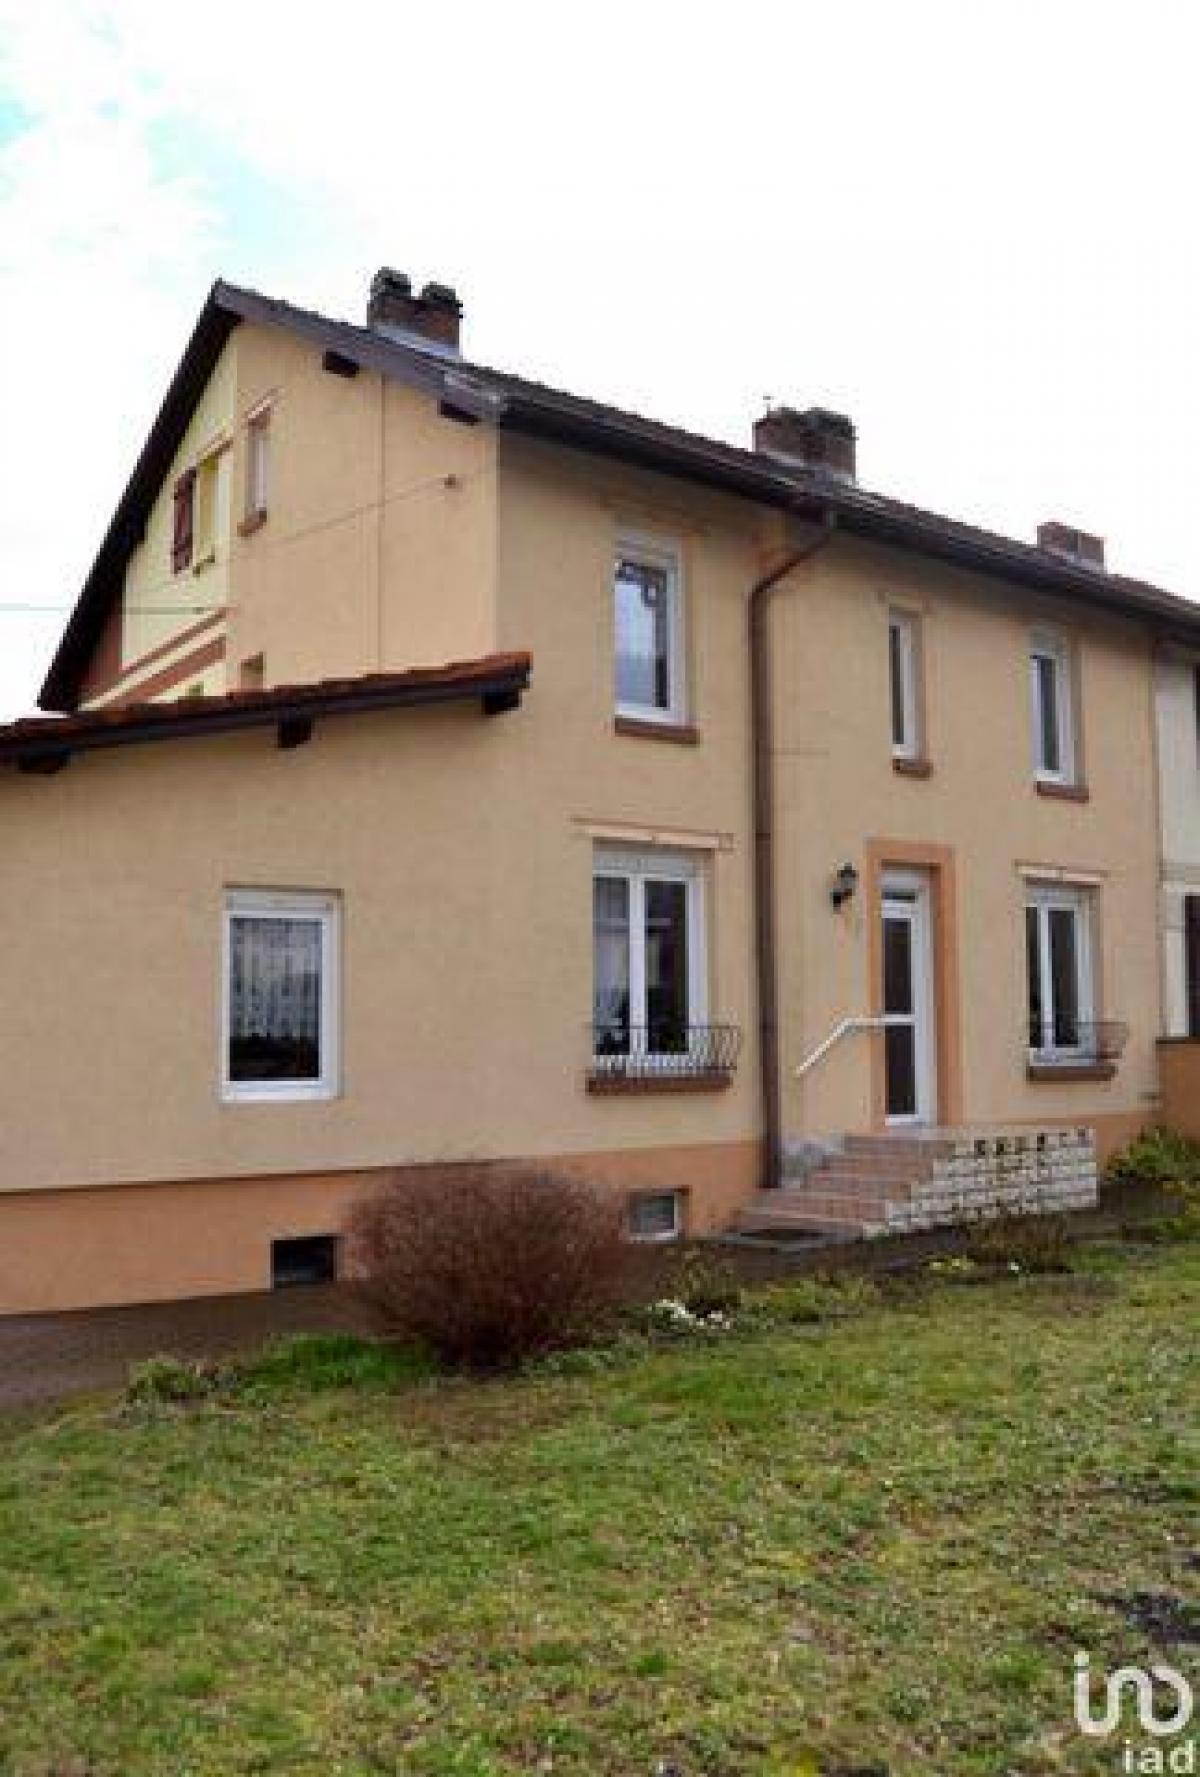 Picture of Home For Sale in Schoeneck, Lorraine, France